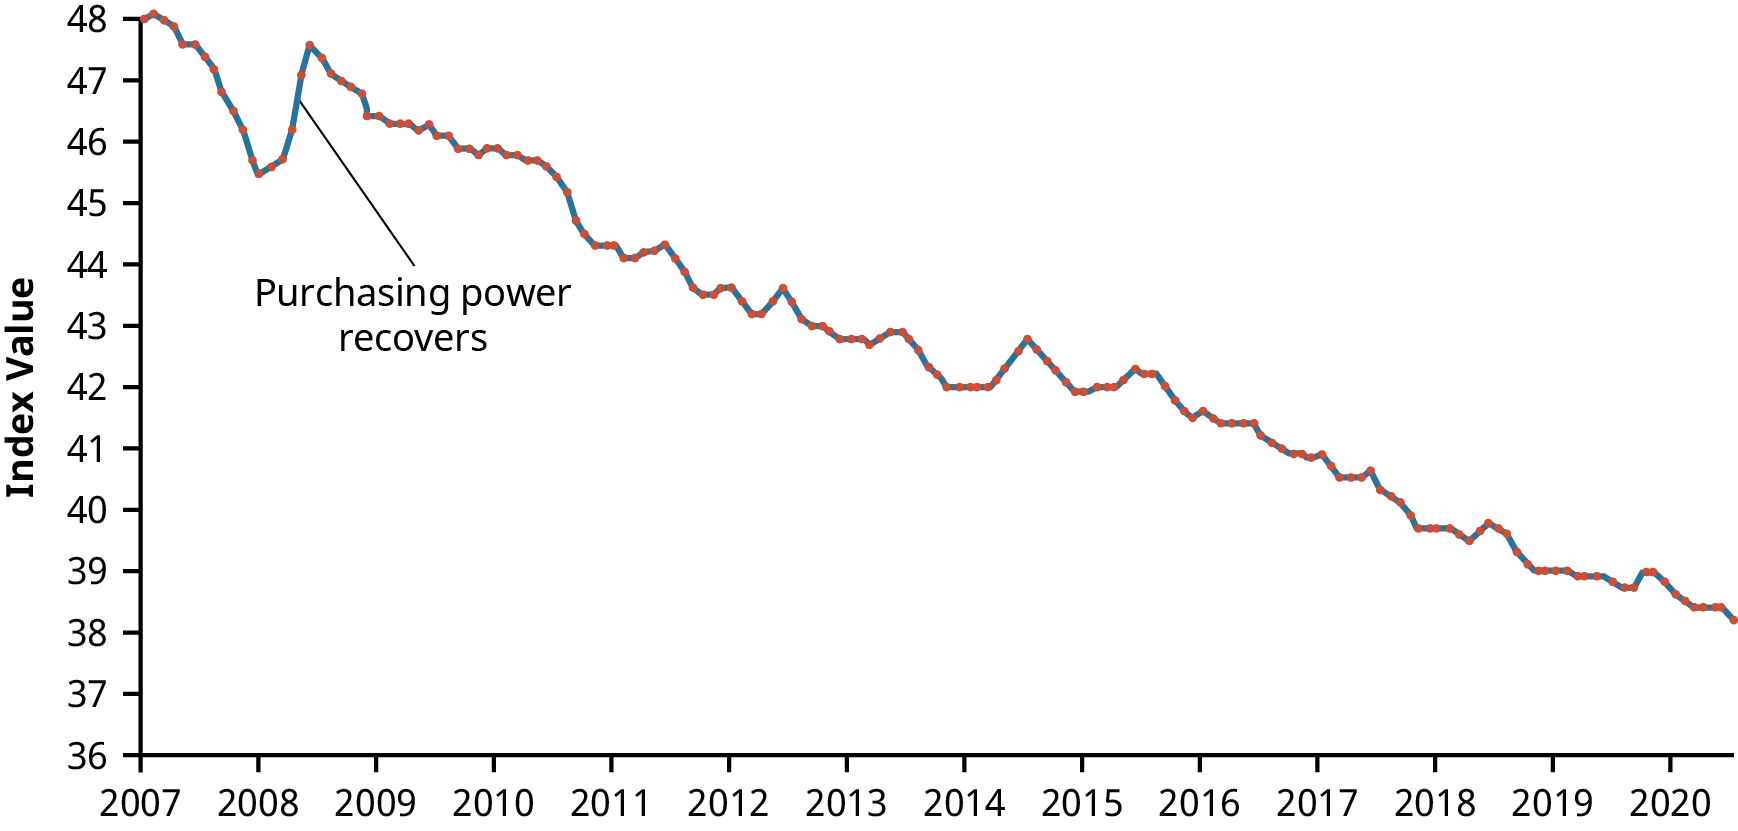 A graphical representation of Historical Purchasing Power Decline as a Result of Inflation from the year 2007-2019.